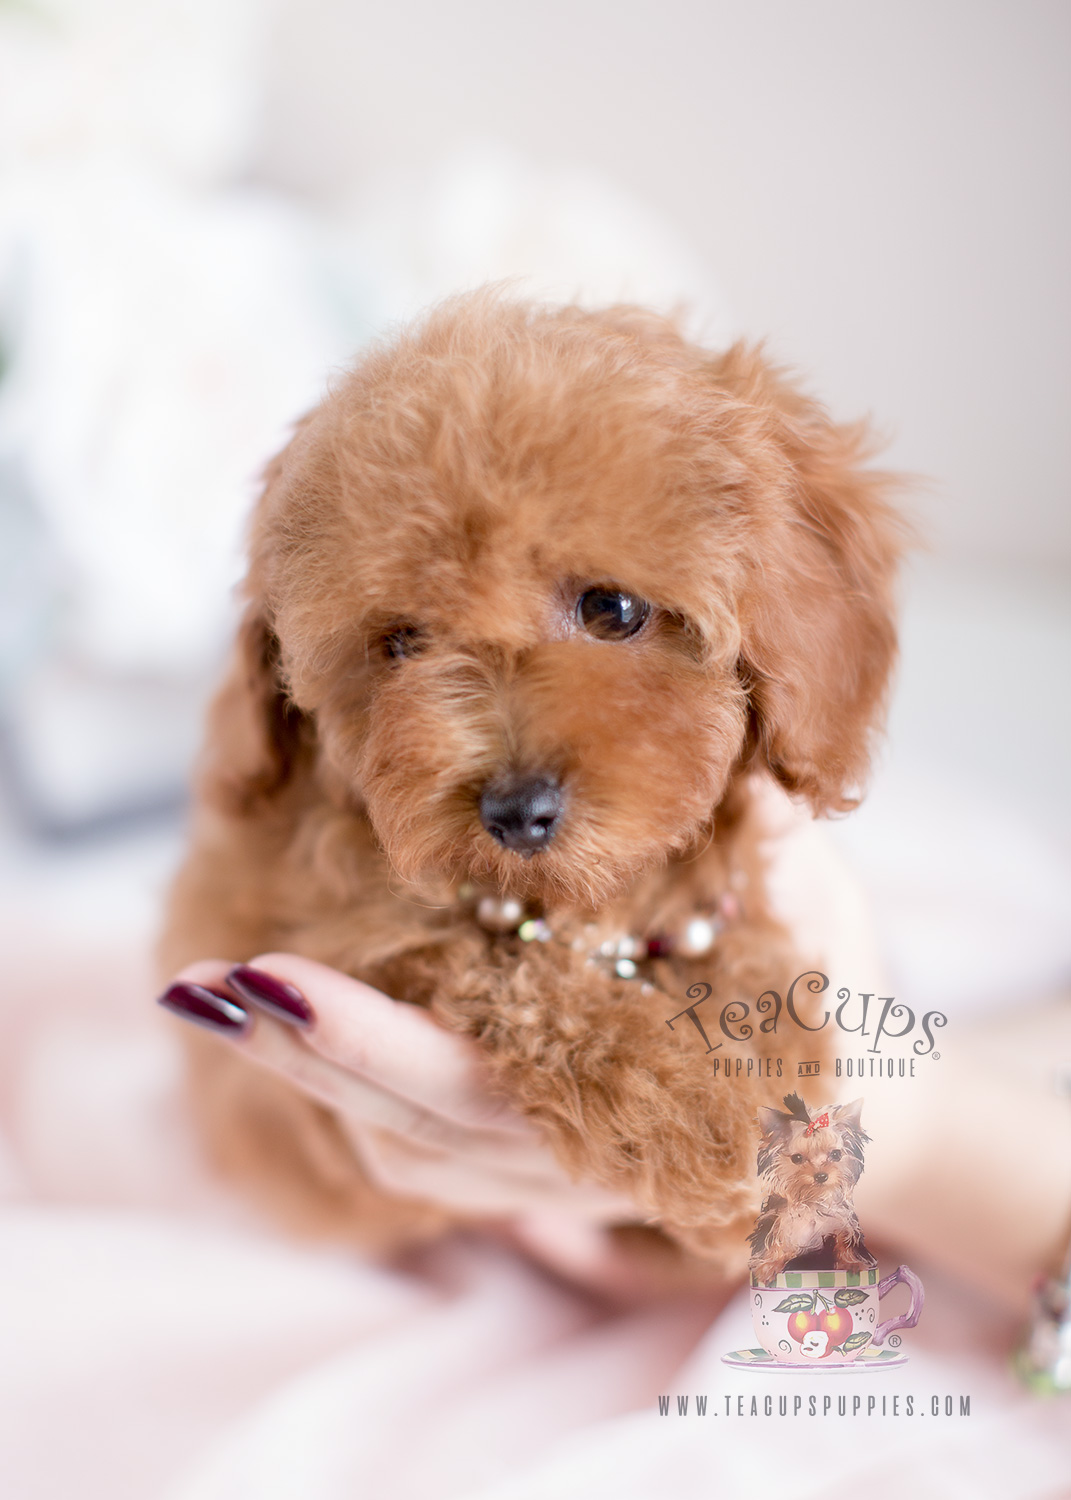 florida's luxury teacup and toy puppy boutique, specializing in tiny t...